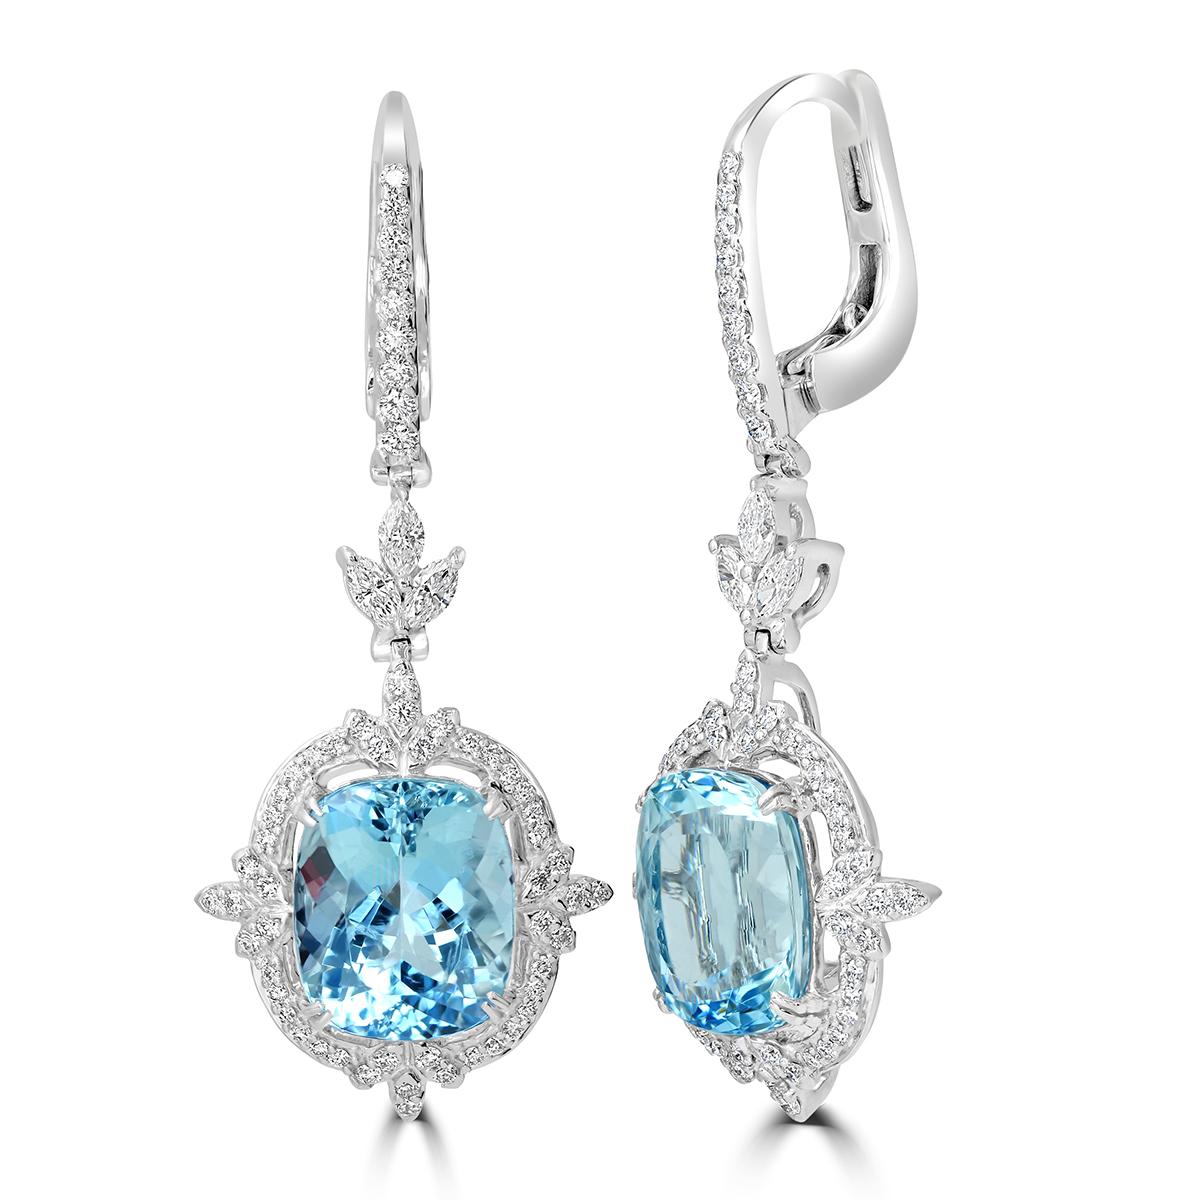 These Exquisite Aqua Blue Cushion Shaped Aquamarine Gemstone Of 9.46Cts Are The Main Attraction in These Shimmering Design Dangle Earring. These Beautiful Aquamarine Gemstone Are Surrounded By Diamonds And Crafted In 14K White Gold.
These Earring